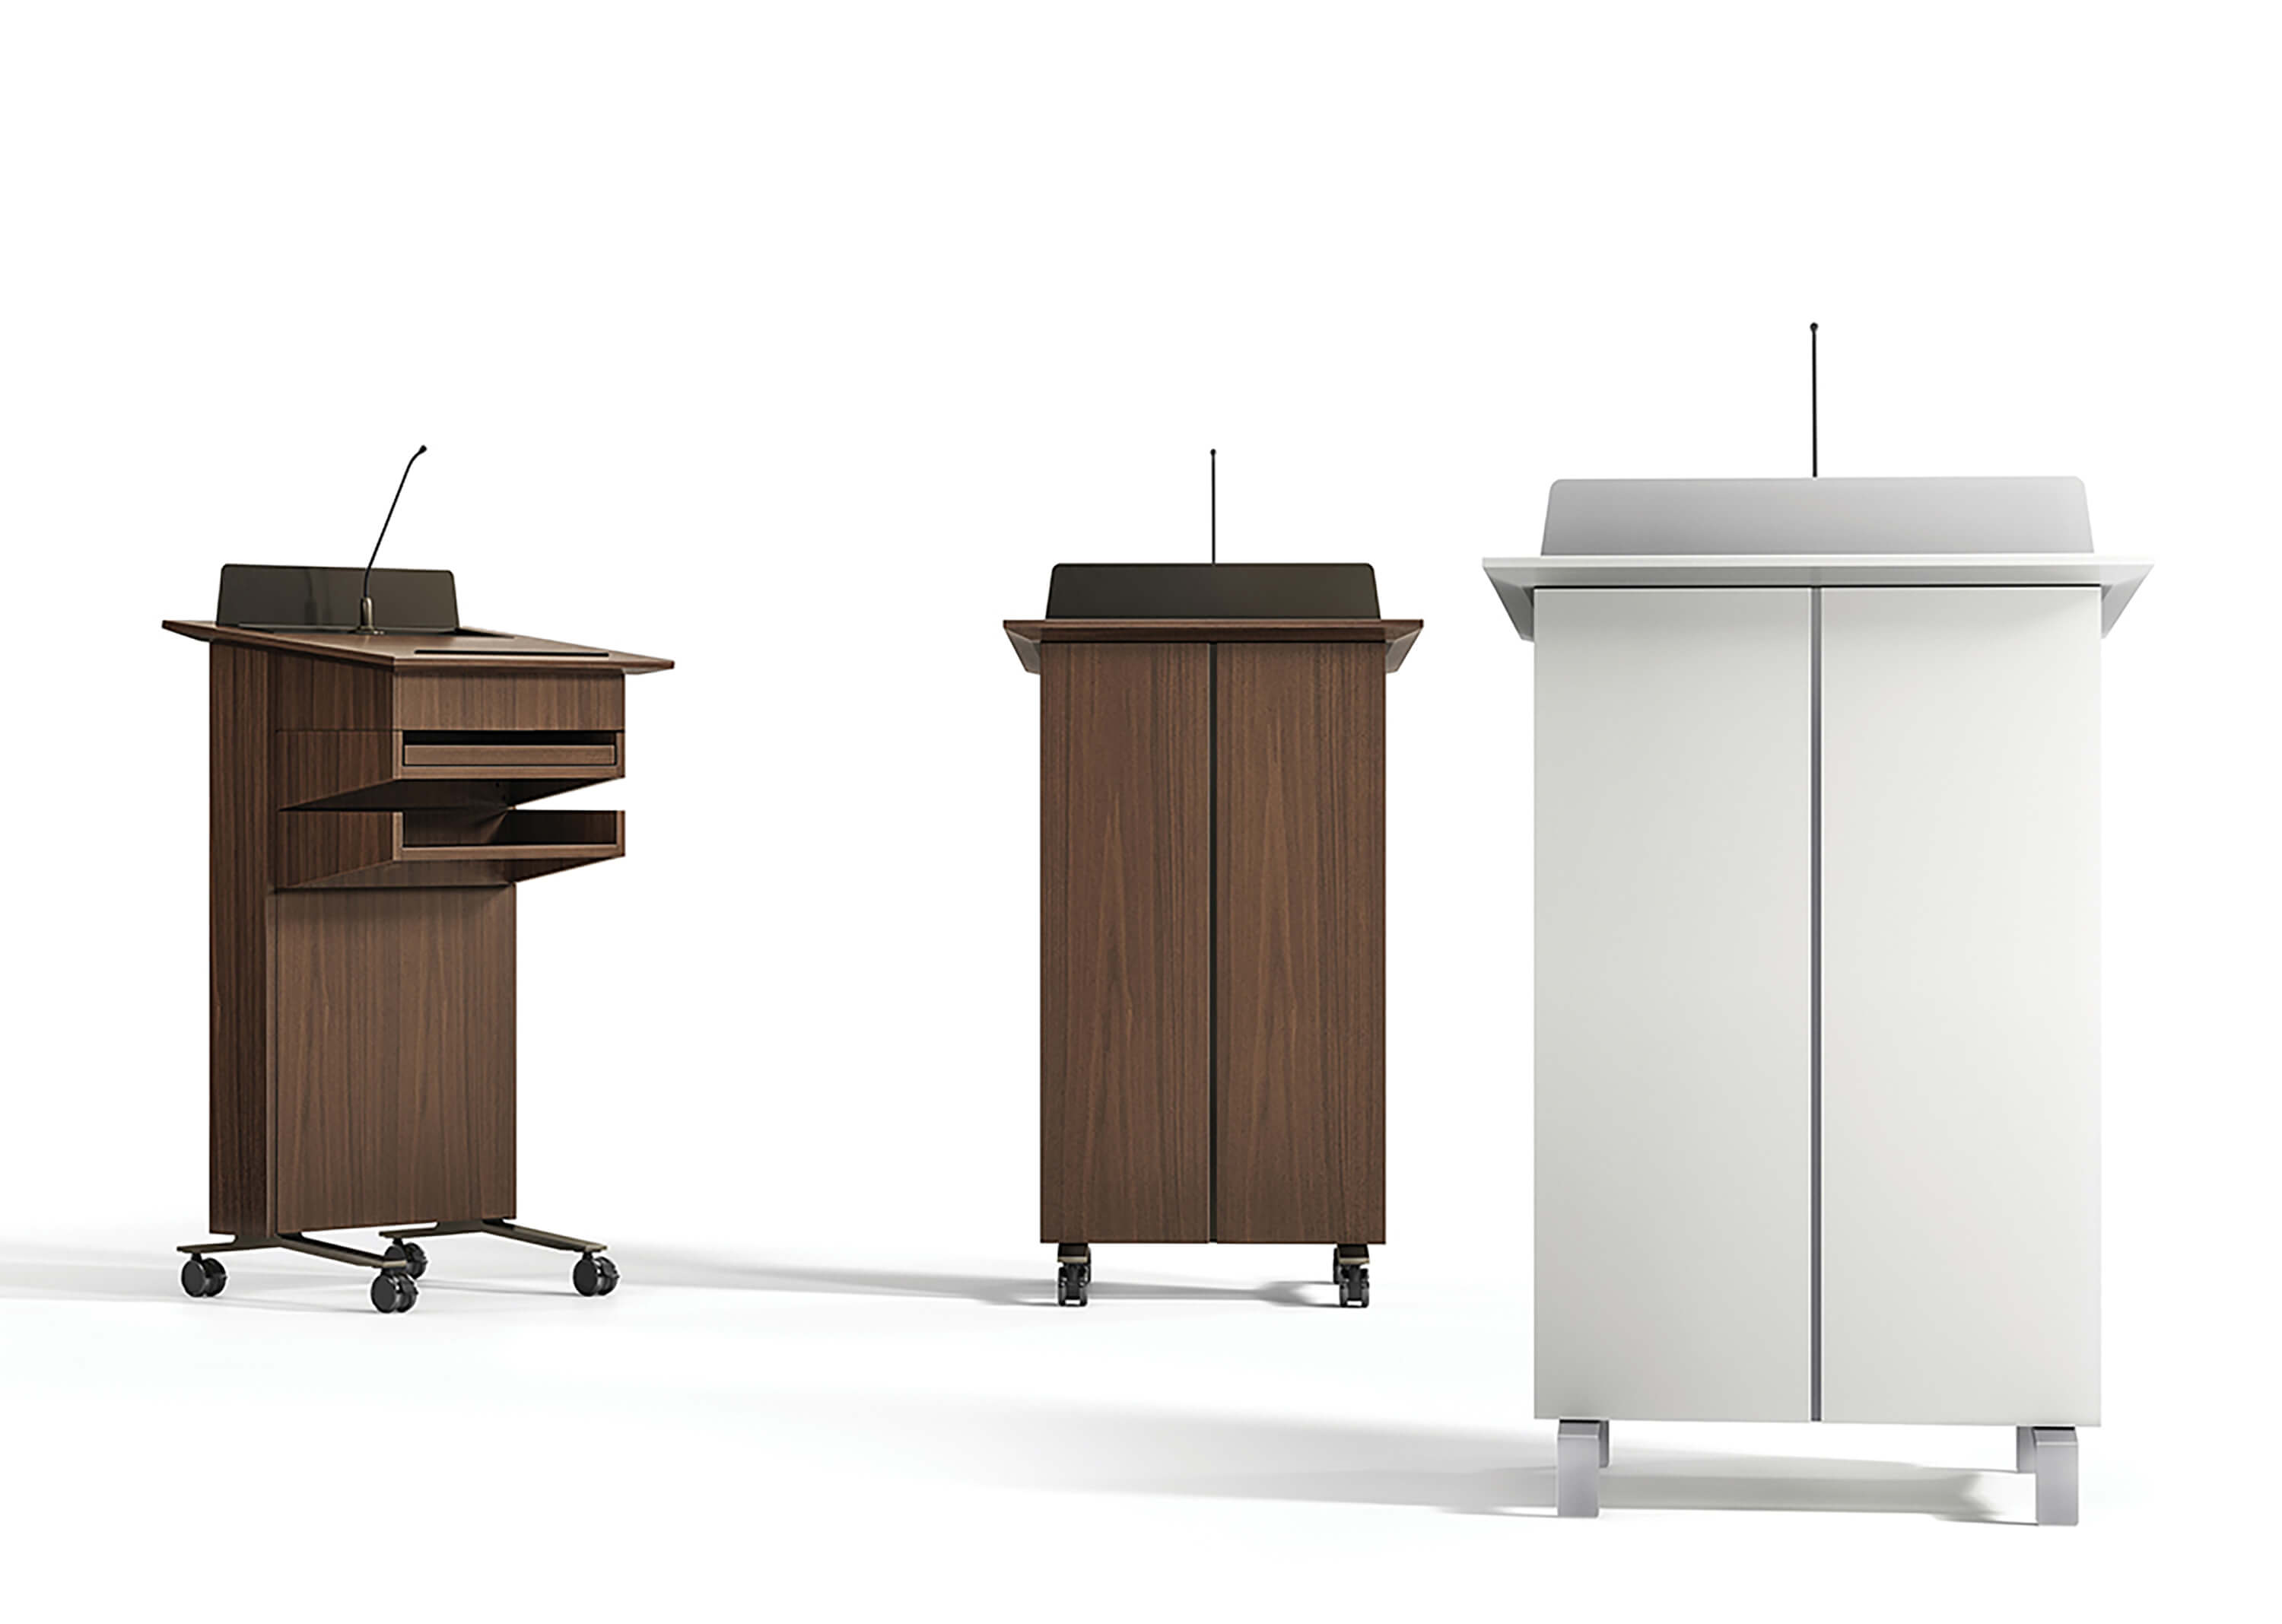 Nucraft_HTL_white-lectern-with-veneer-column-lecterns_front-and-side-views_HR_rgb.jpg feature slideshow image 1